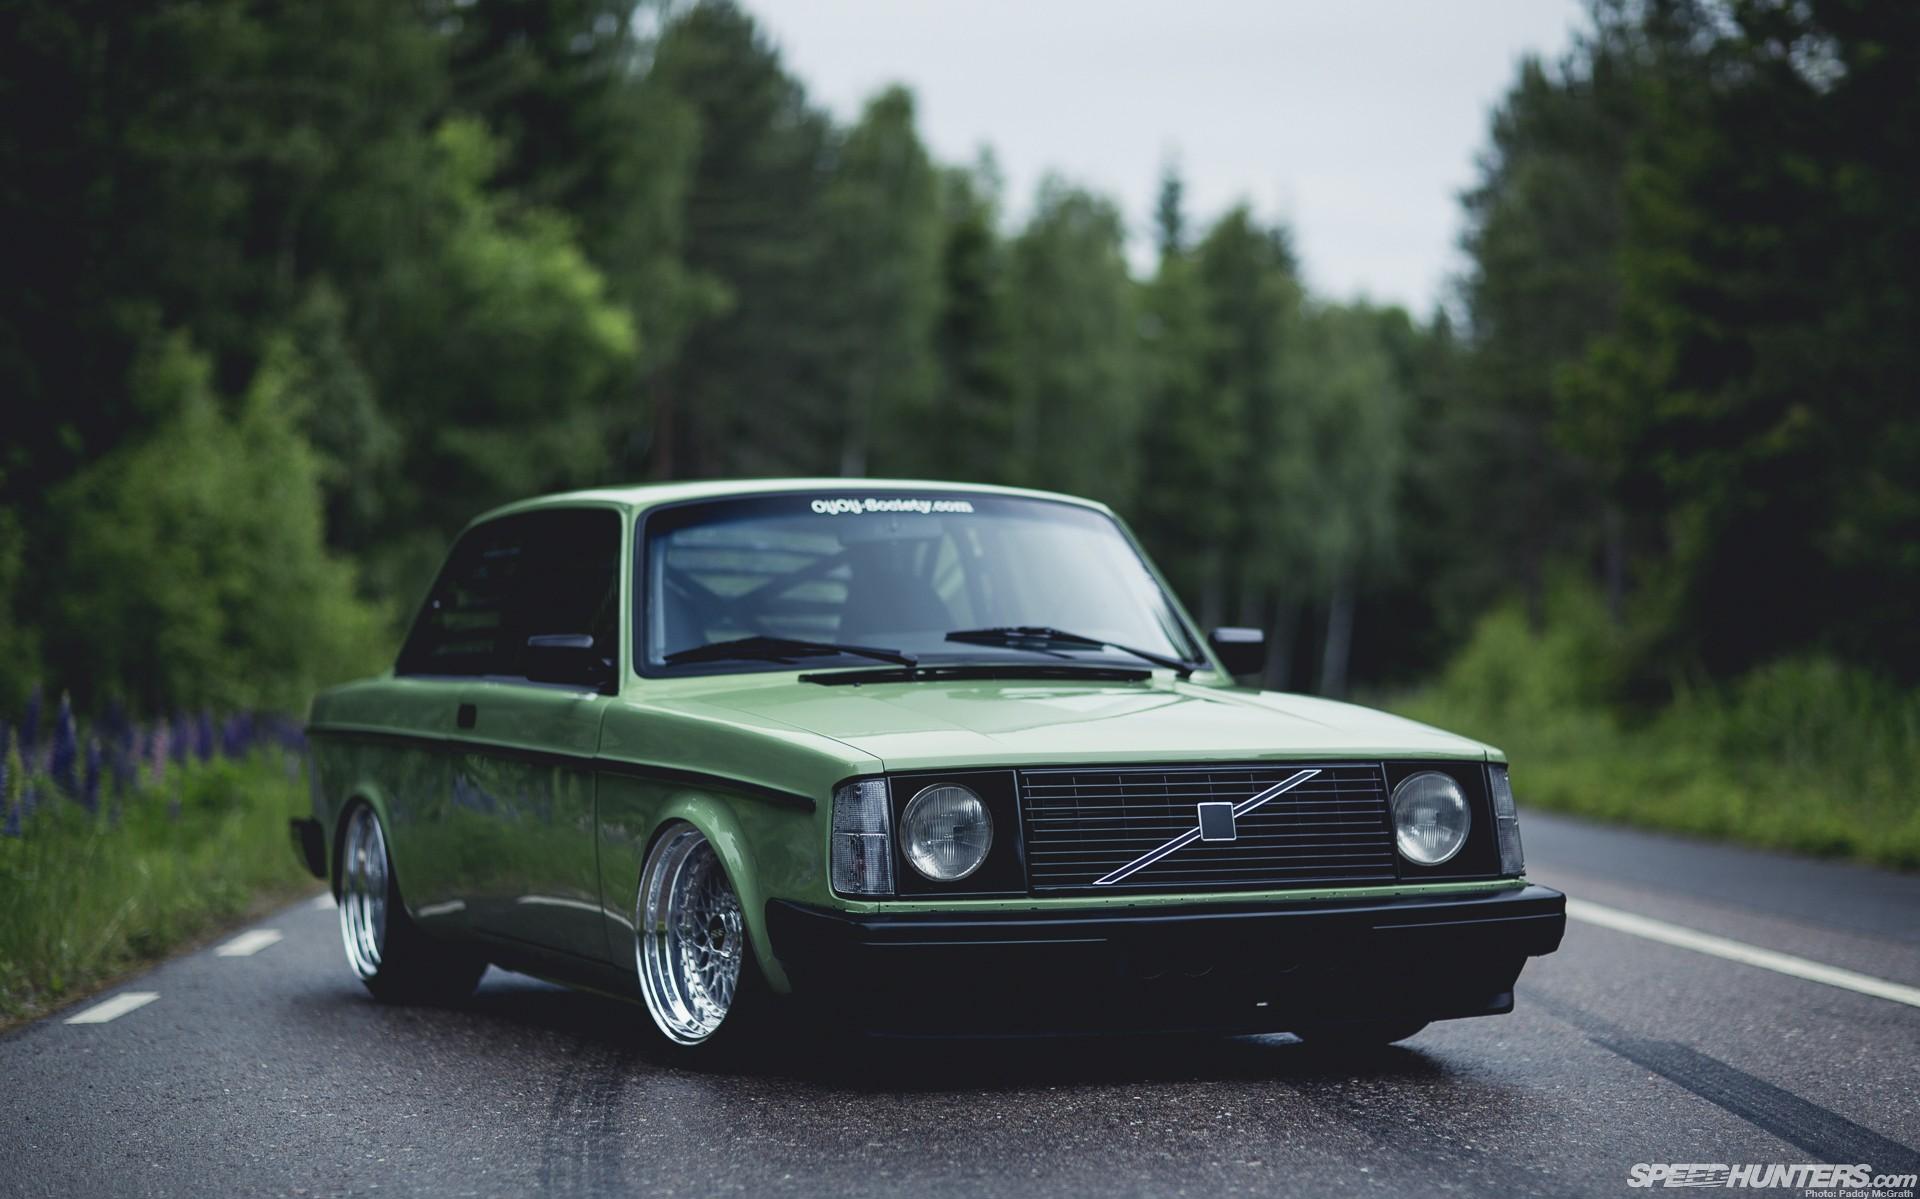 Trees Old Cars Volvo Outdoors Roads Tuning